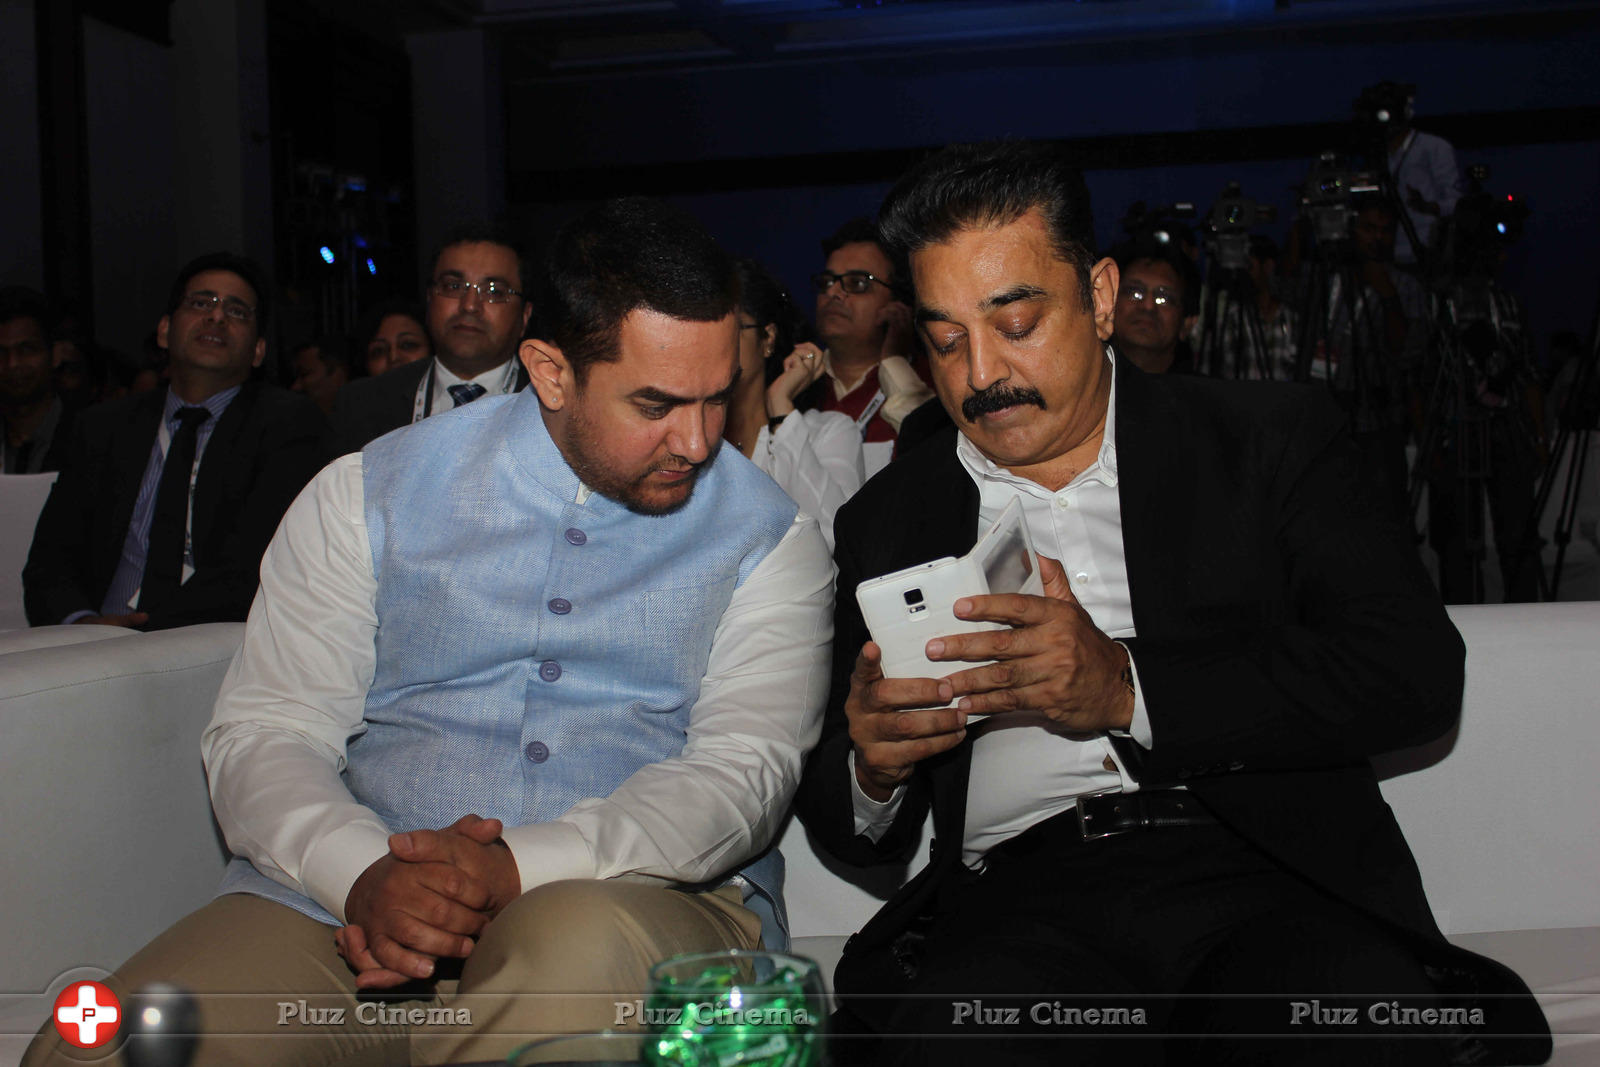 Aamir Khan - Aamir Khan with Kamal Haasan at the inaugural session of FICCI Frames 2015 Photos | Picture 1001437